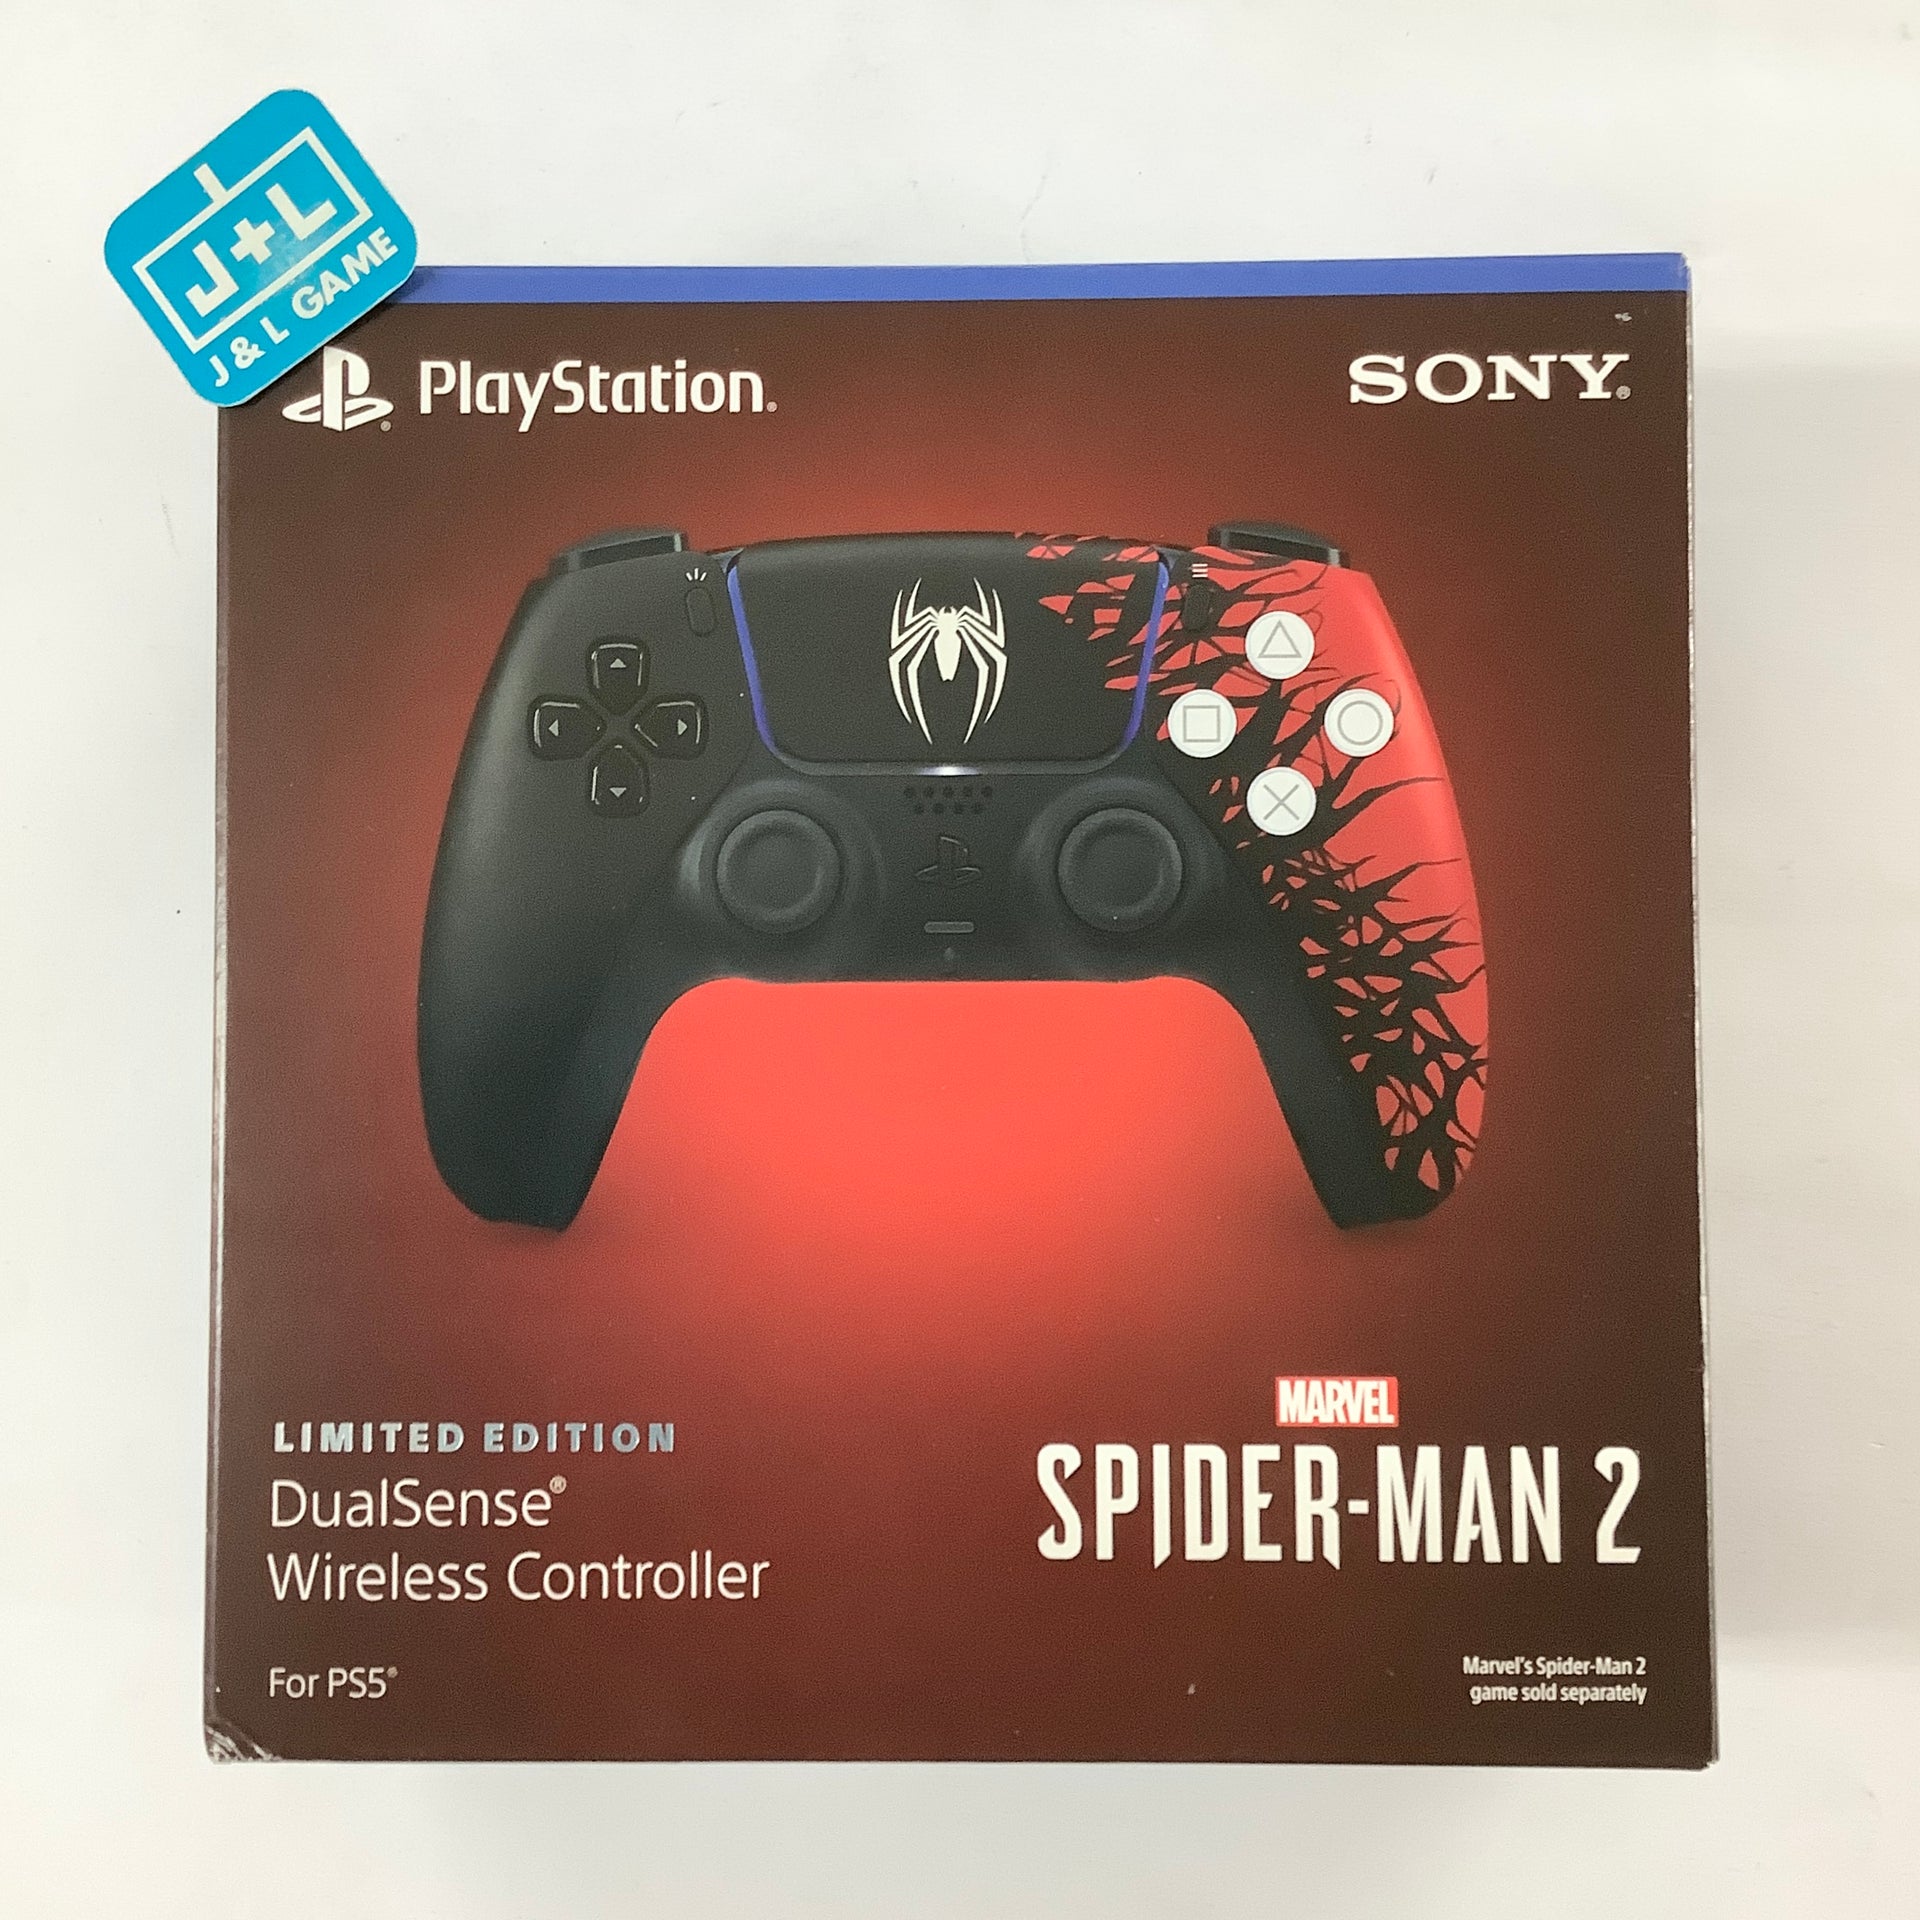 SONY PlayStation 5 DualSense Wireless Controller (Spider-Man 2) - (PS5